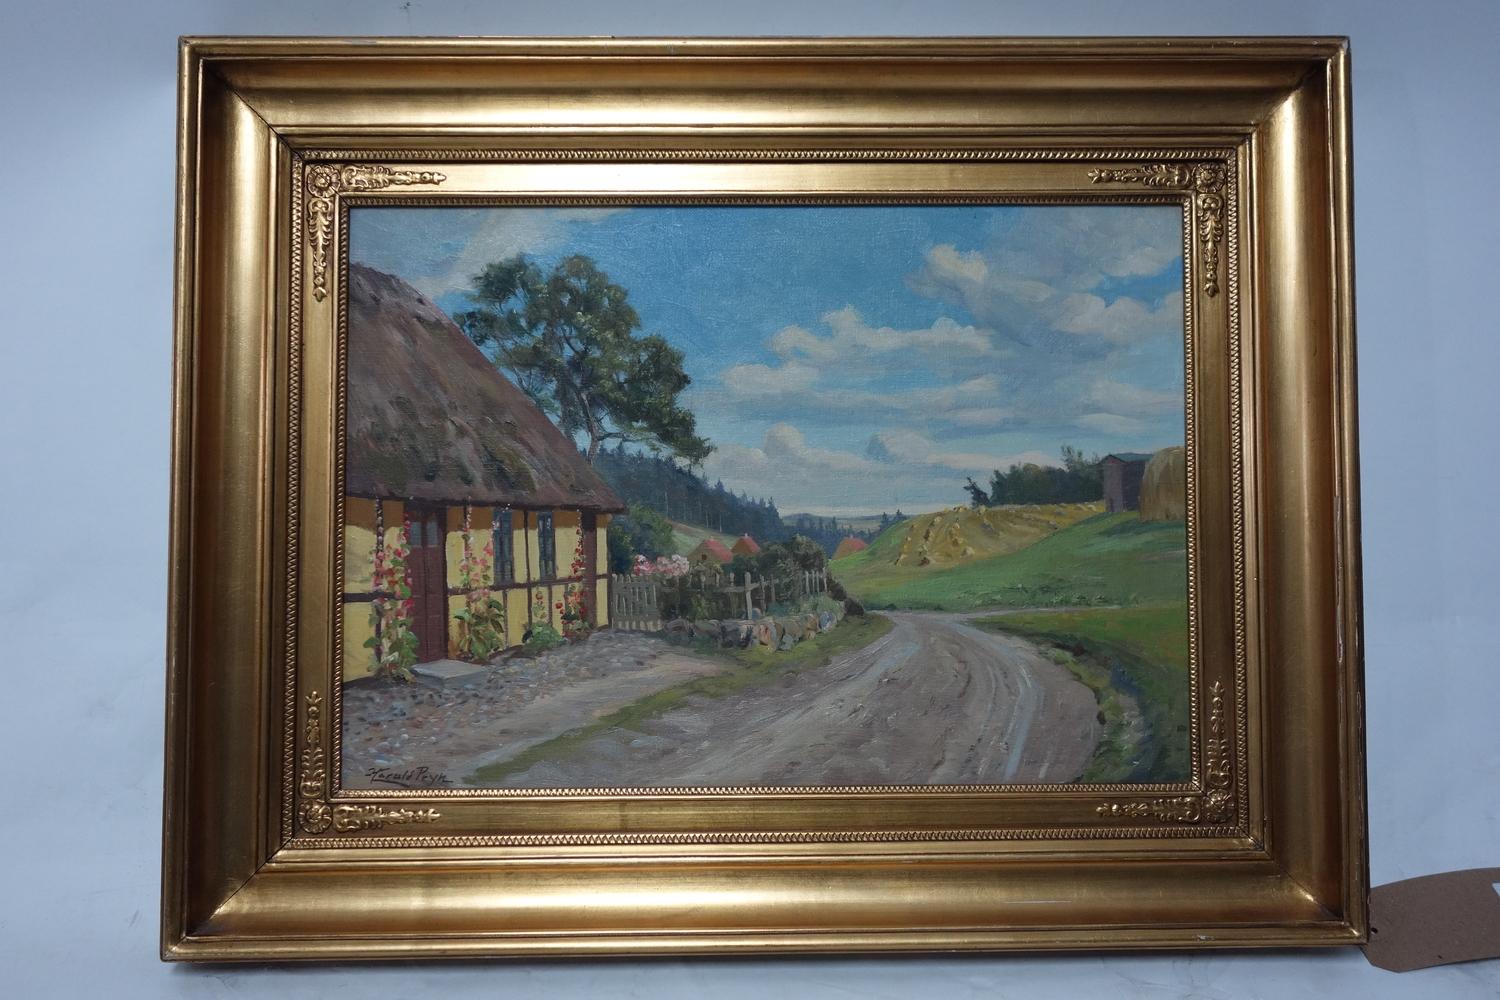 Harald Pryn (Danish, 1891-1968), A farmstead in a rural landscape, oil on canvas, signed lower left, - Image 2 of 3